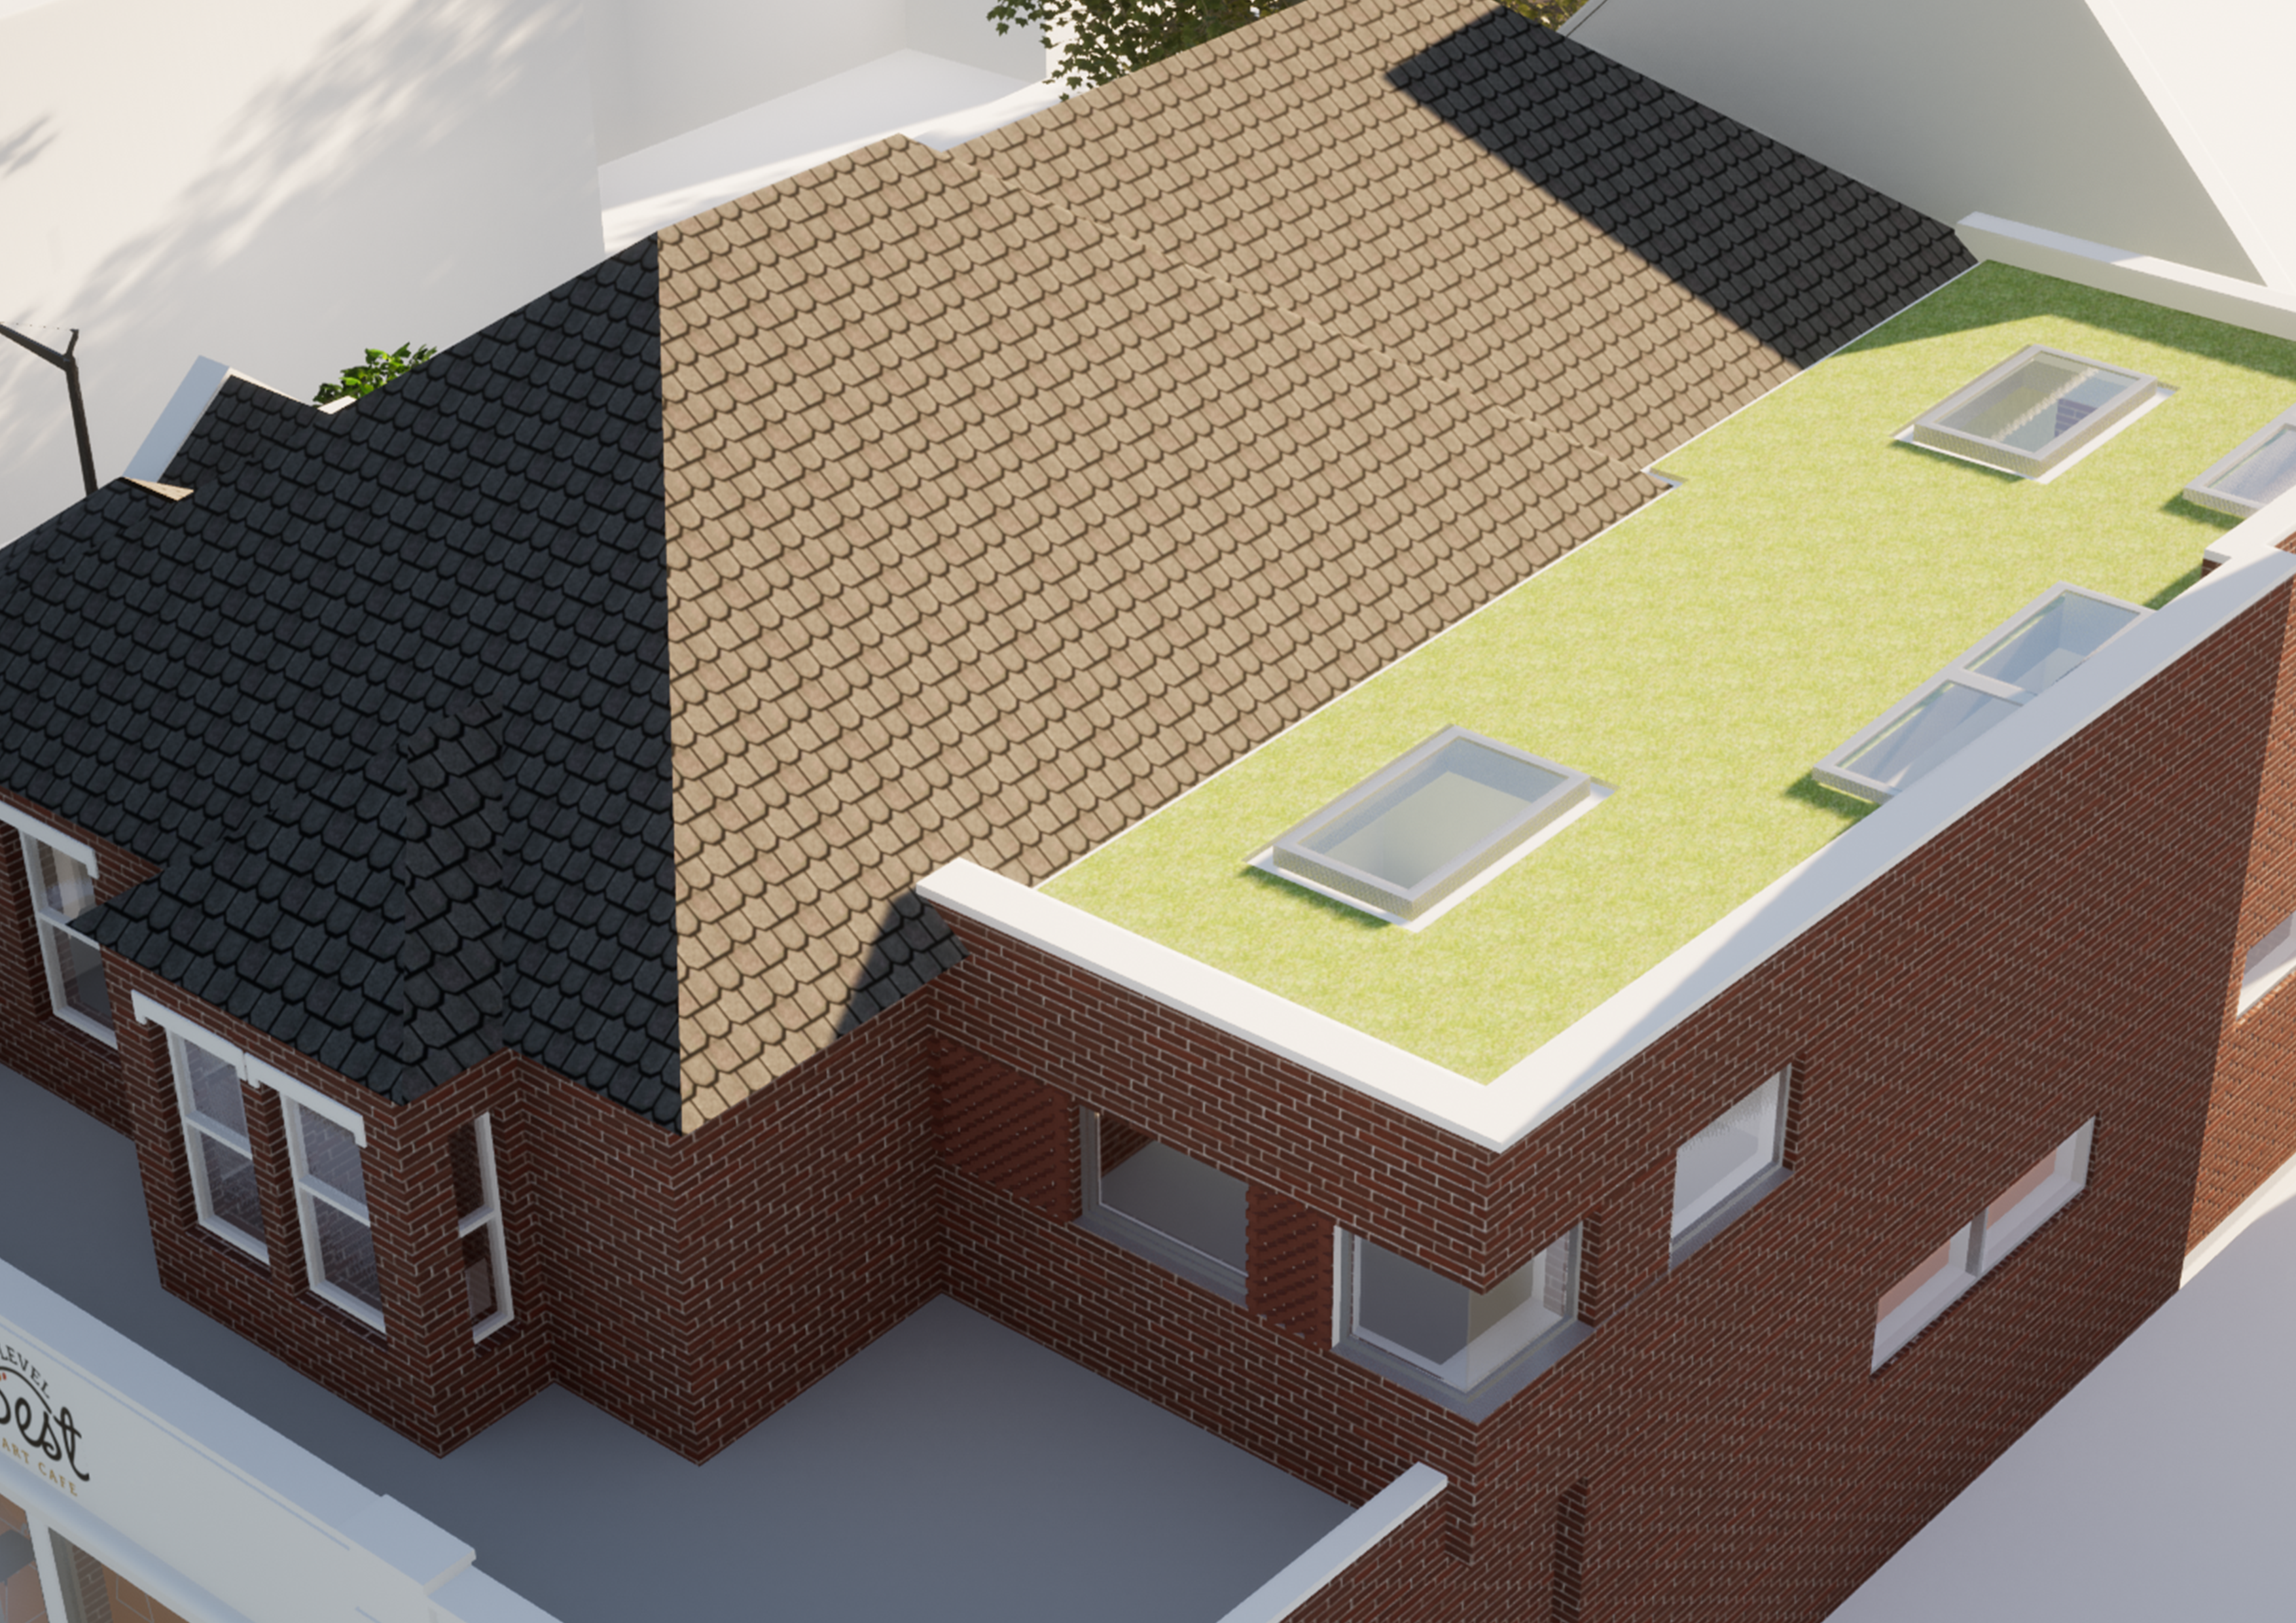 A 3D view of a community centre project in Colchester